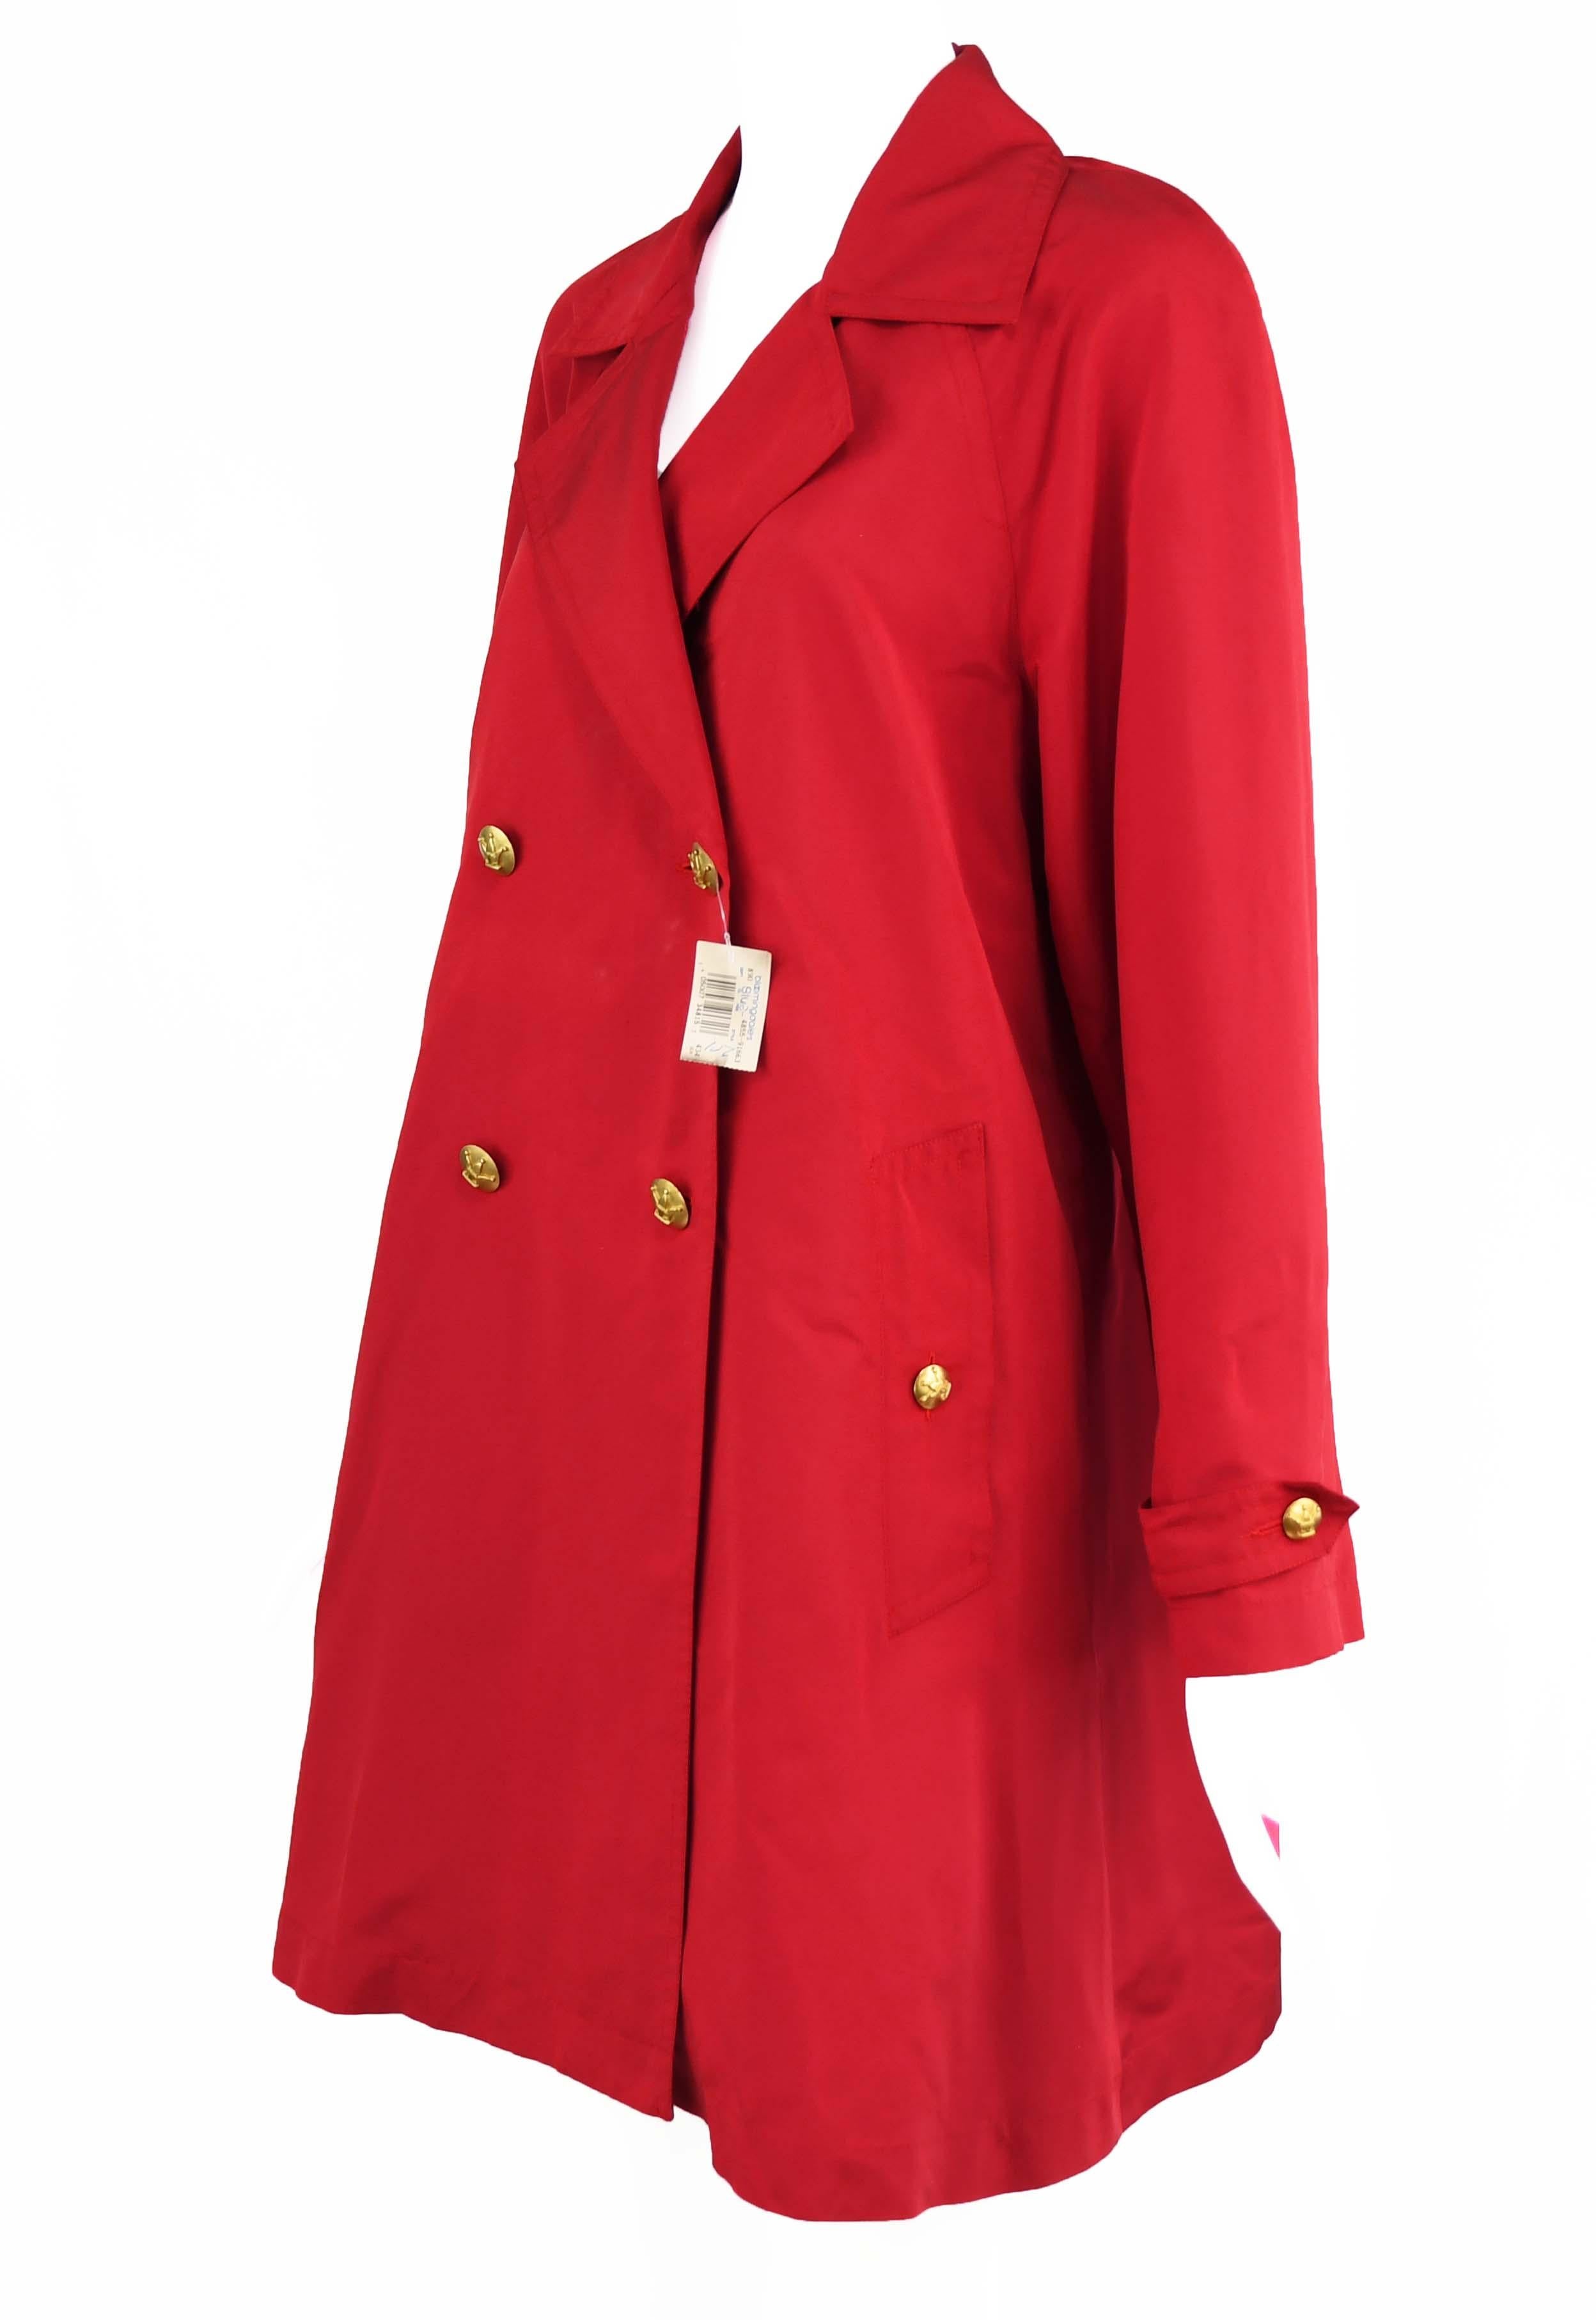 Classic A-line vintage Chanel red rain coat with beautiful gold buttons with crowns.  Double breasted with a peak lapel collar. 

Size: FR 34

Condition: Very good vintage condition.  Very light white fading on the front of the coat, hardly